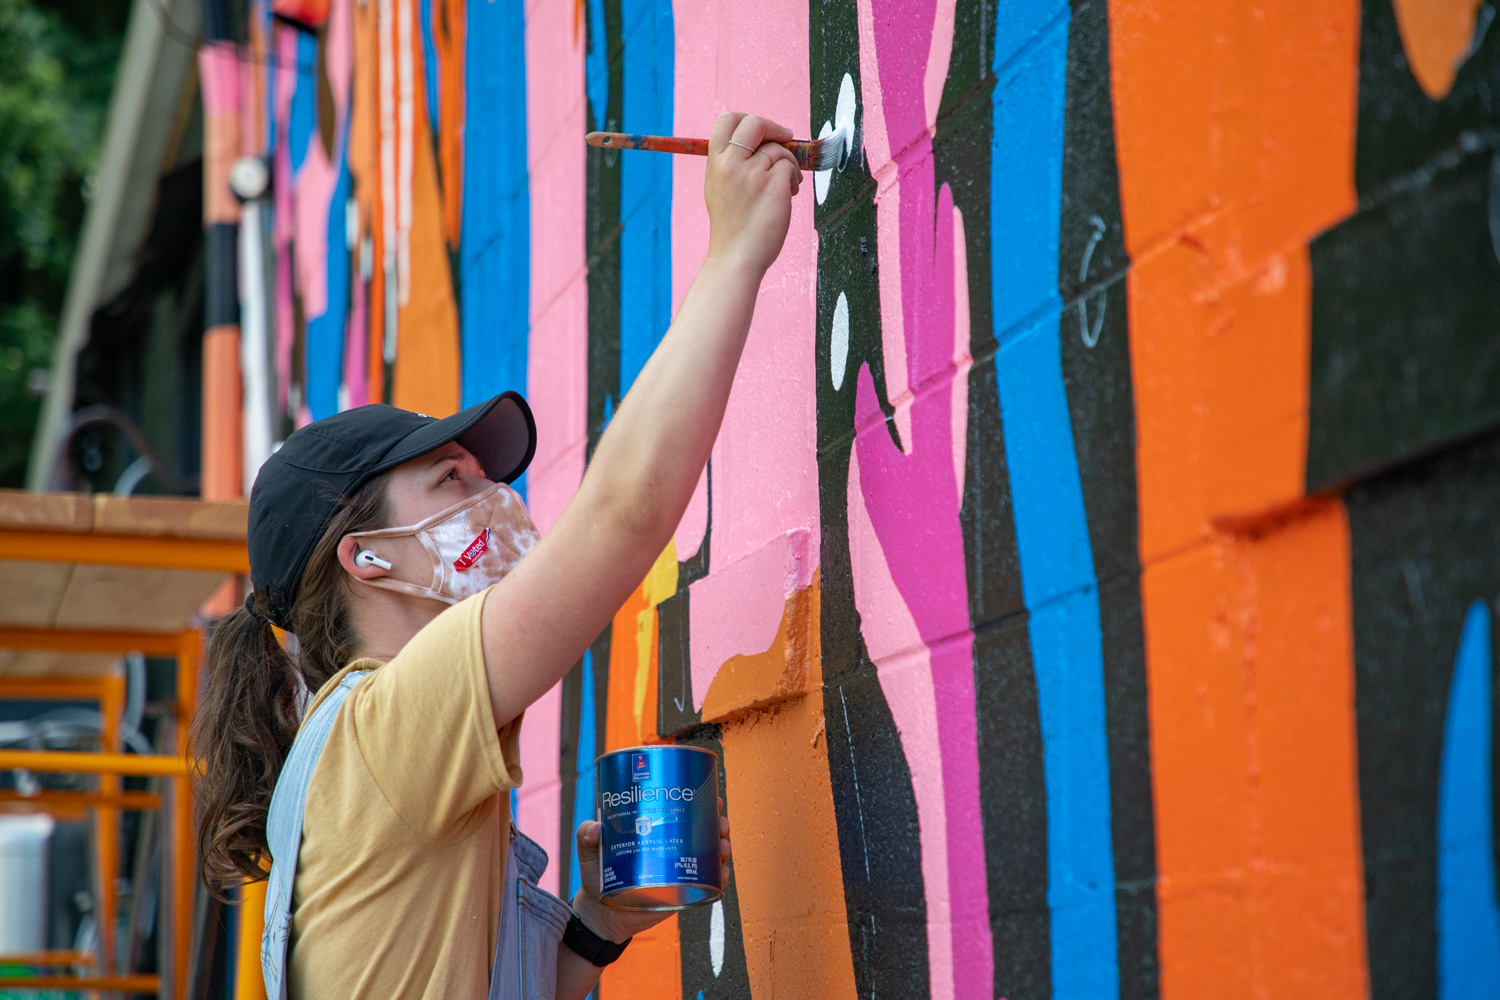 Paris Woodhull's mural in Knoxville for Walls for Women